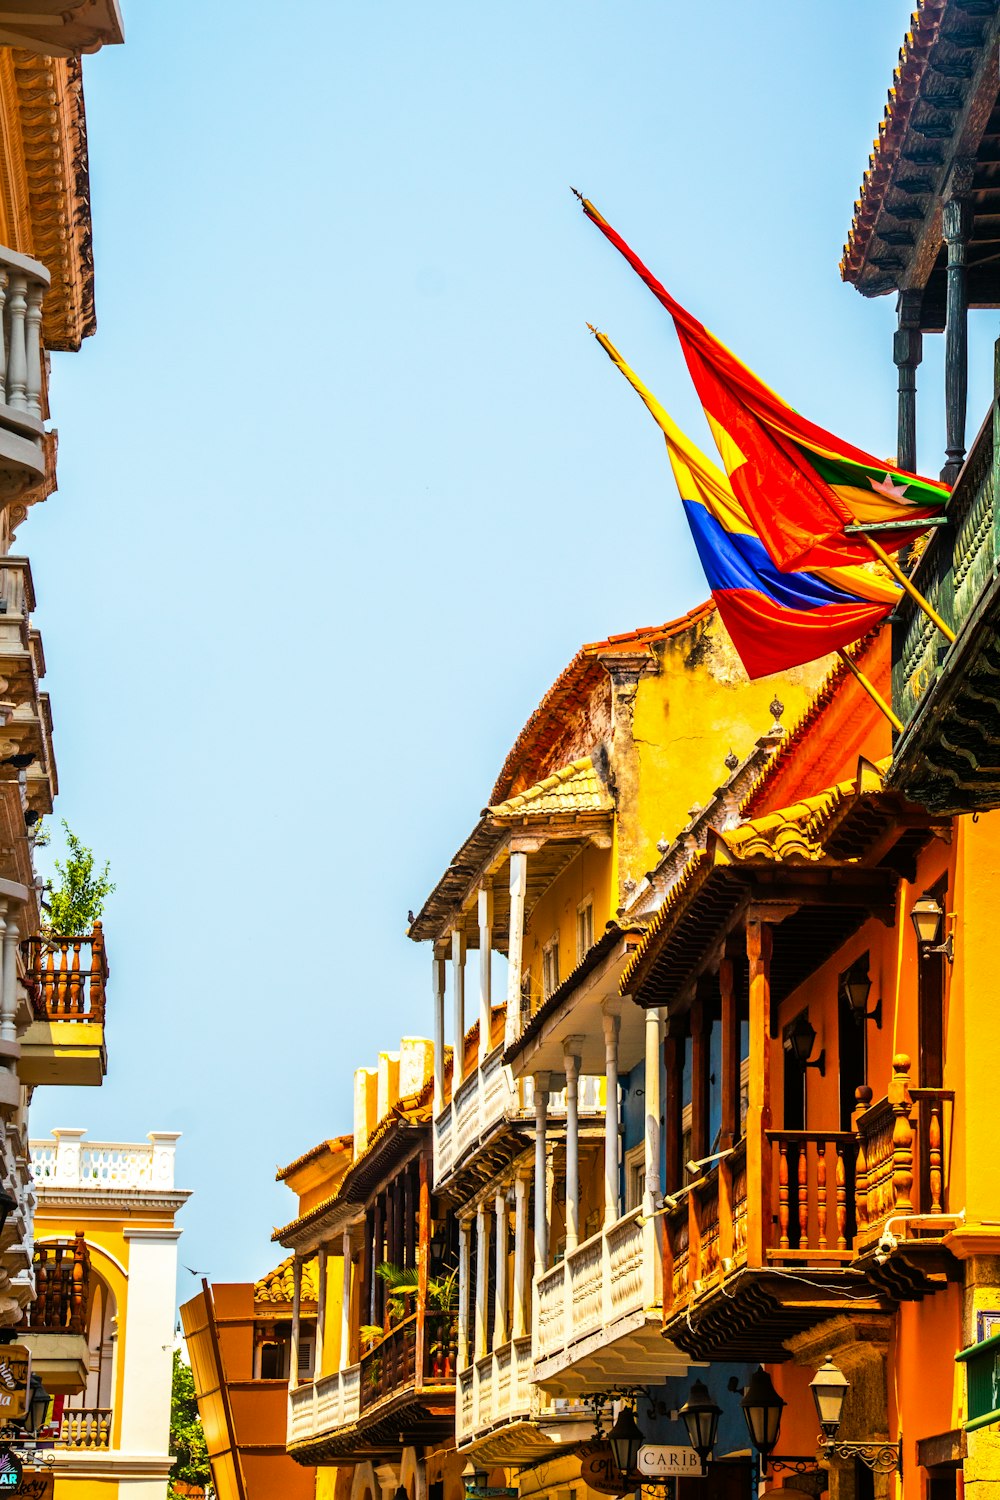 a row of buildings with colorful flags hanging from the balconies